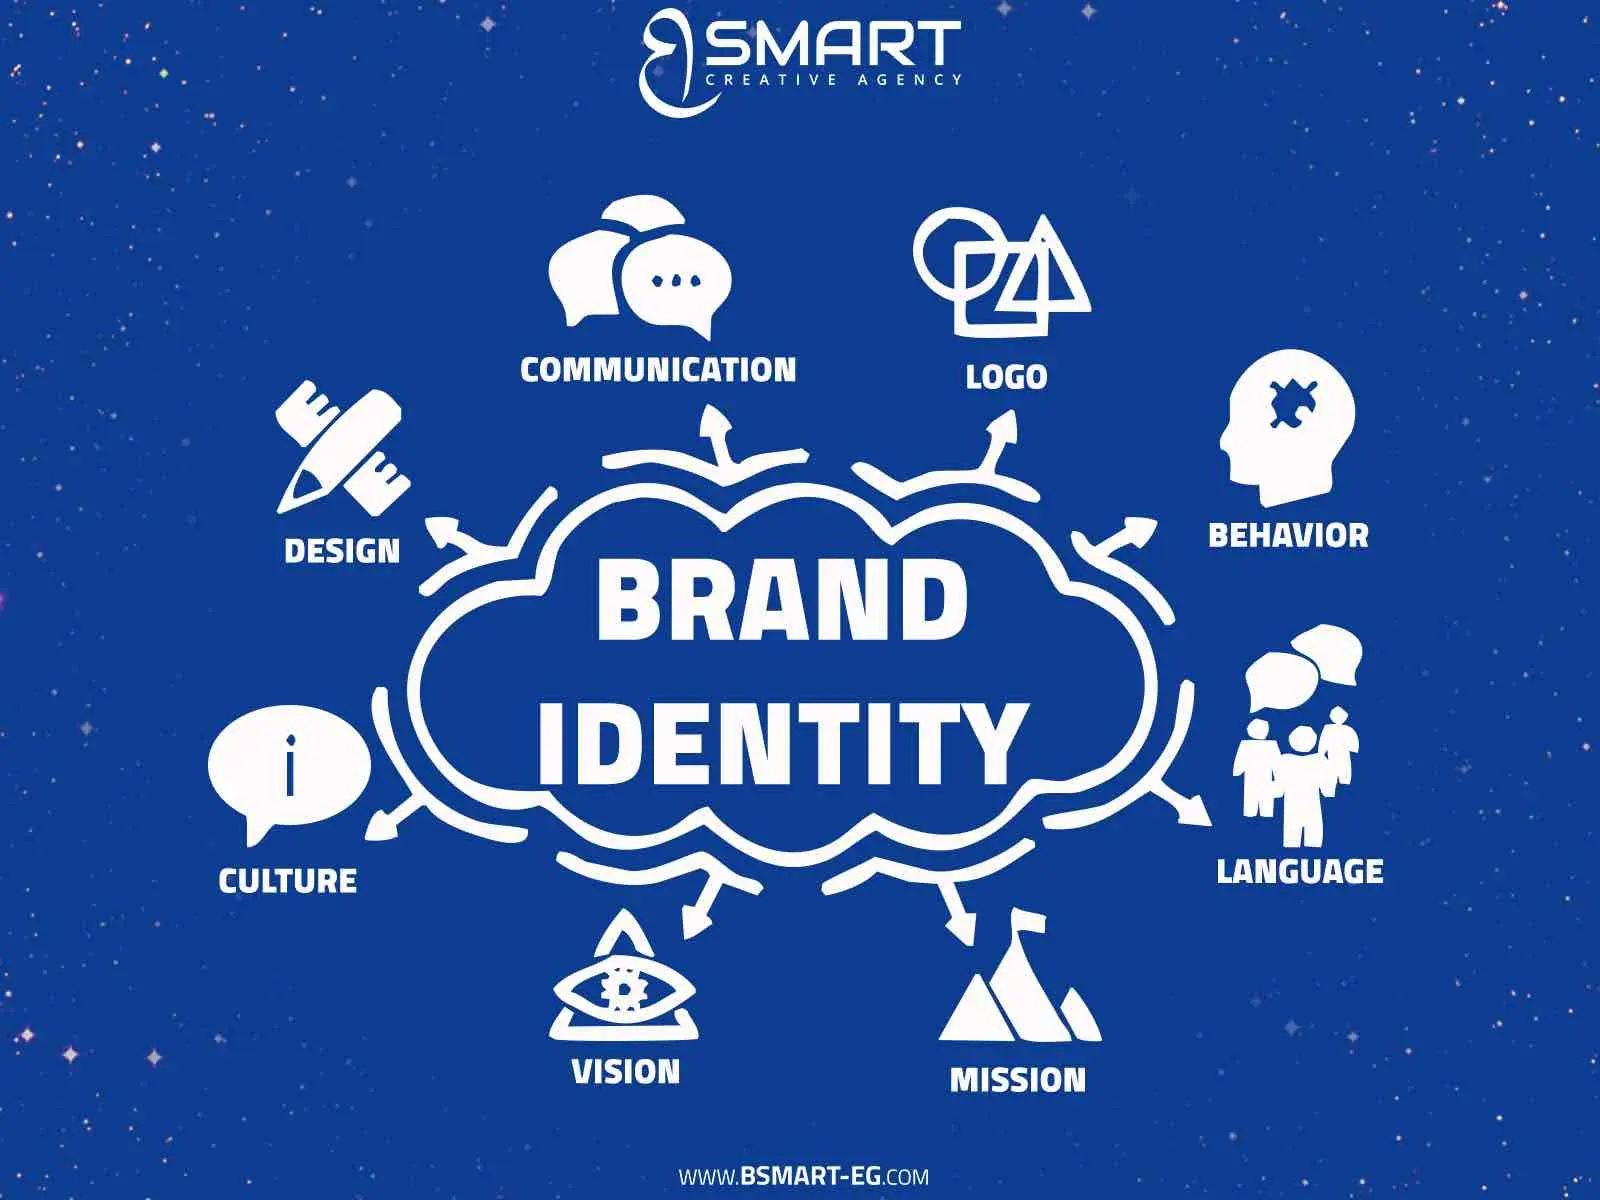 Brand identity elements and their importance